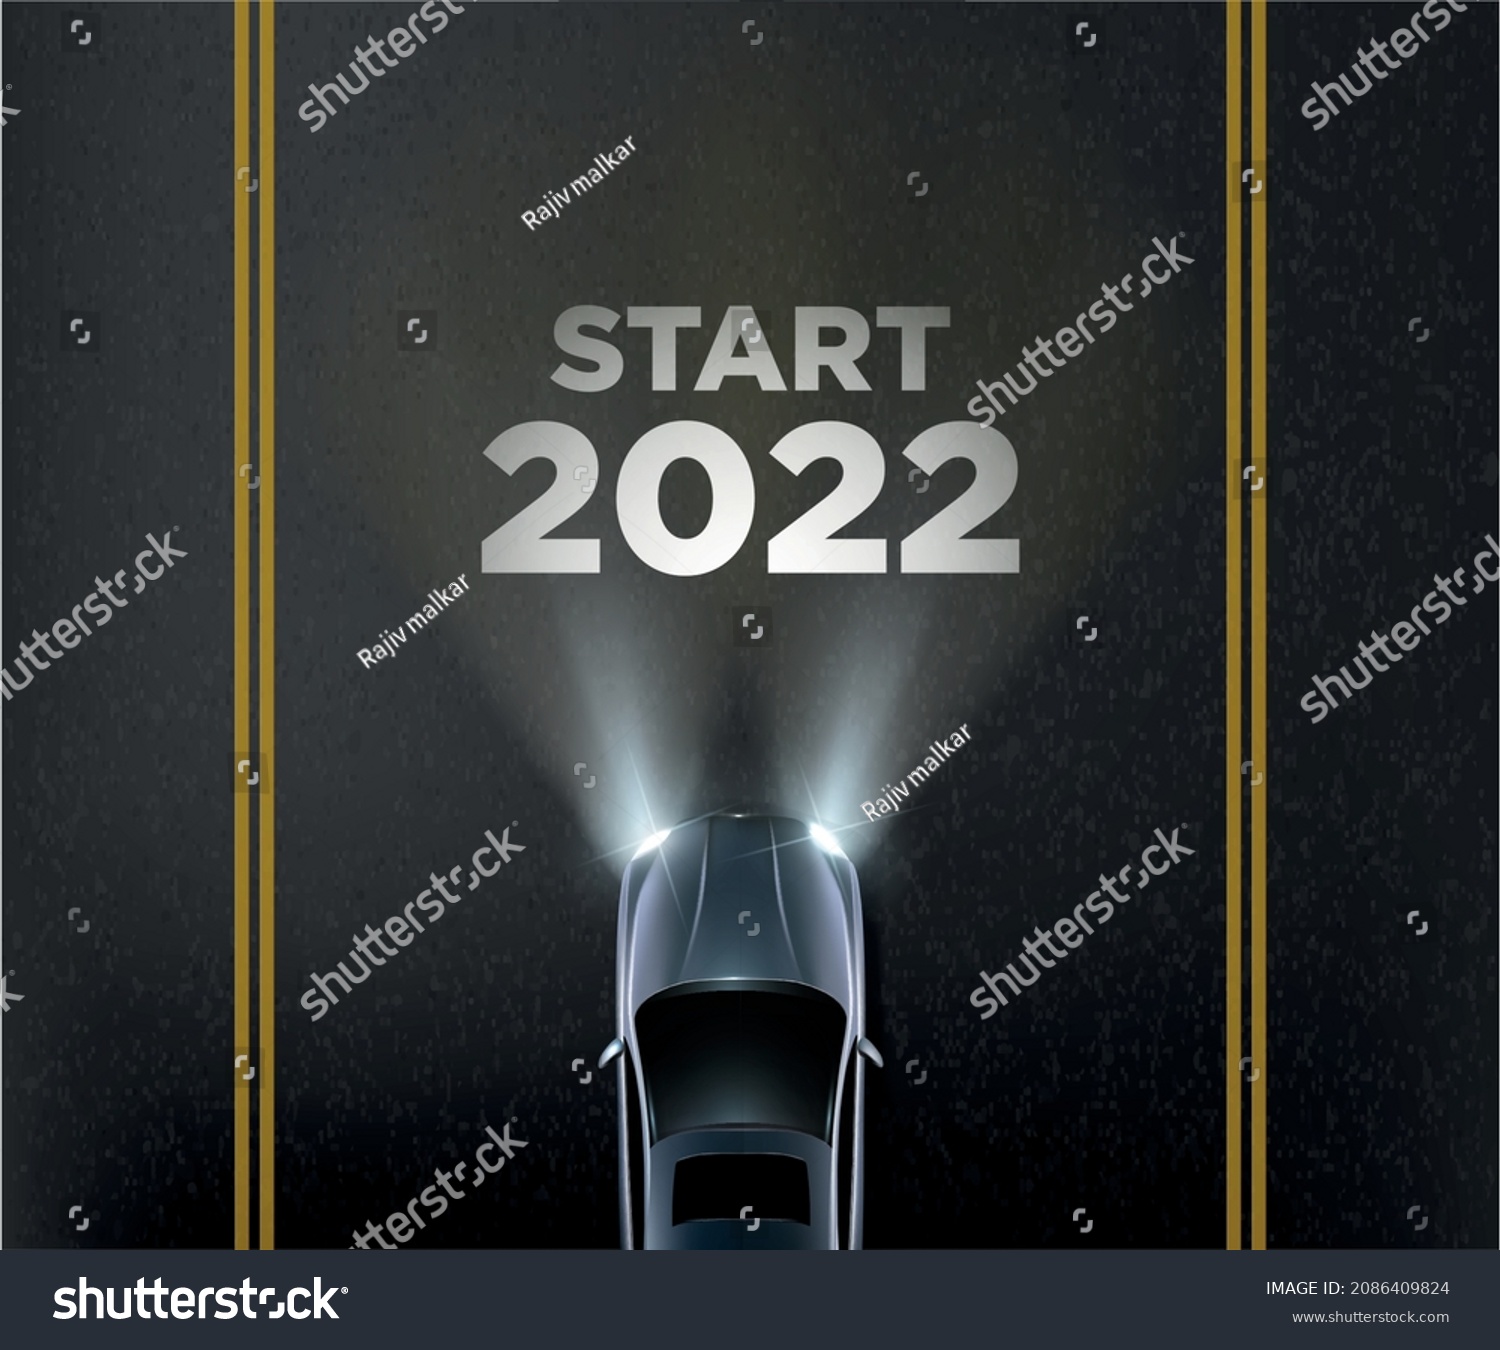 new year 2022 concept with car headlights, 2022 painted on road  #2086409824